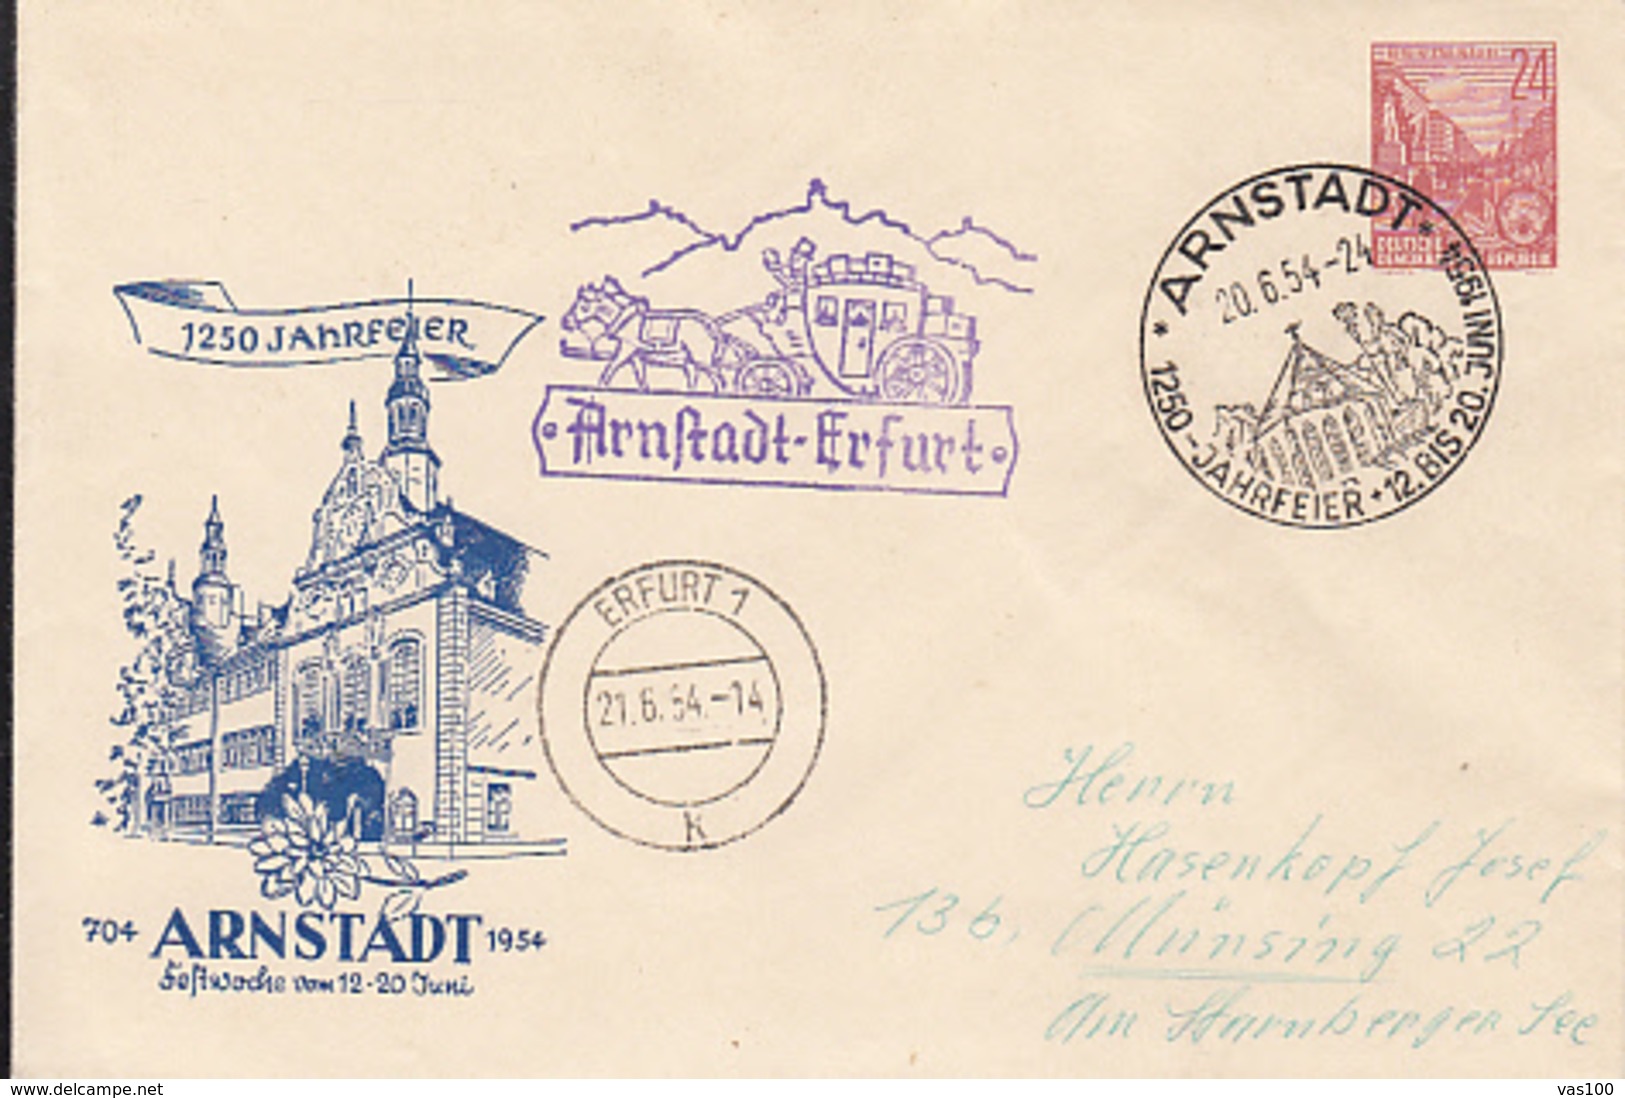 ARNSTADT TOWN ANNIVERSARY, 5 YEAR PLANS, COVER STATIONERY, ENTIER POSTAL, 1954, GERMANY - Enveloppes - Oblitérées